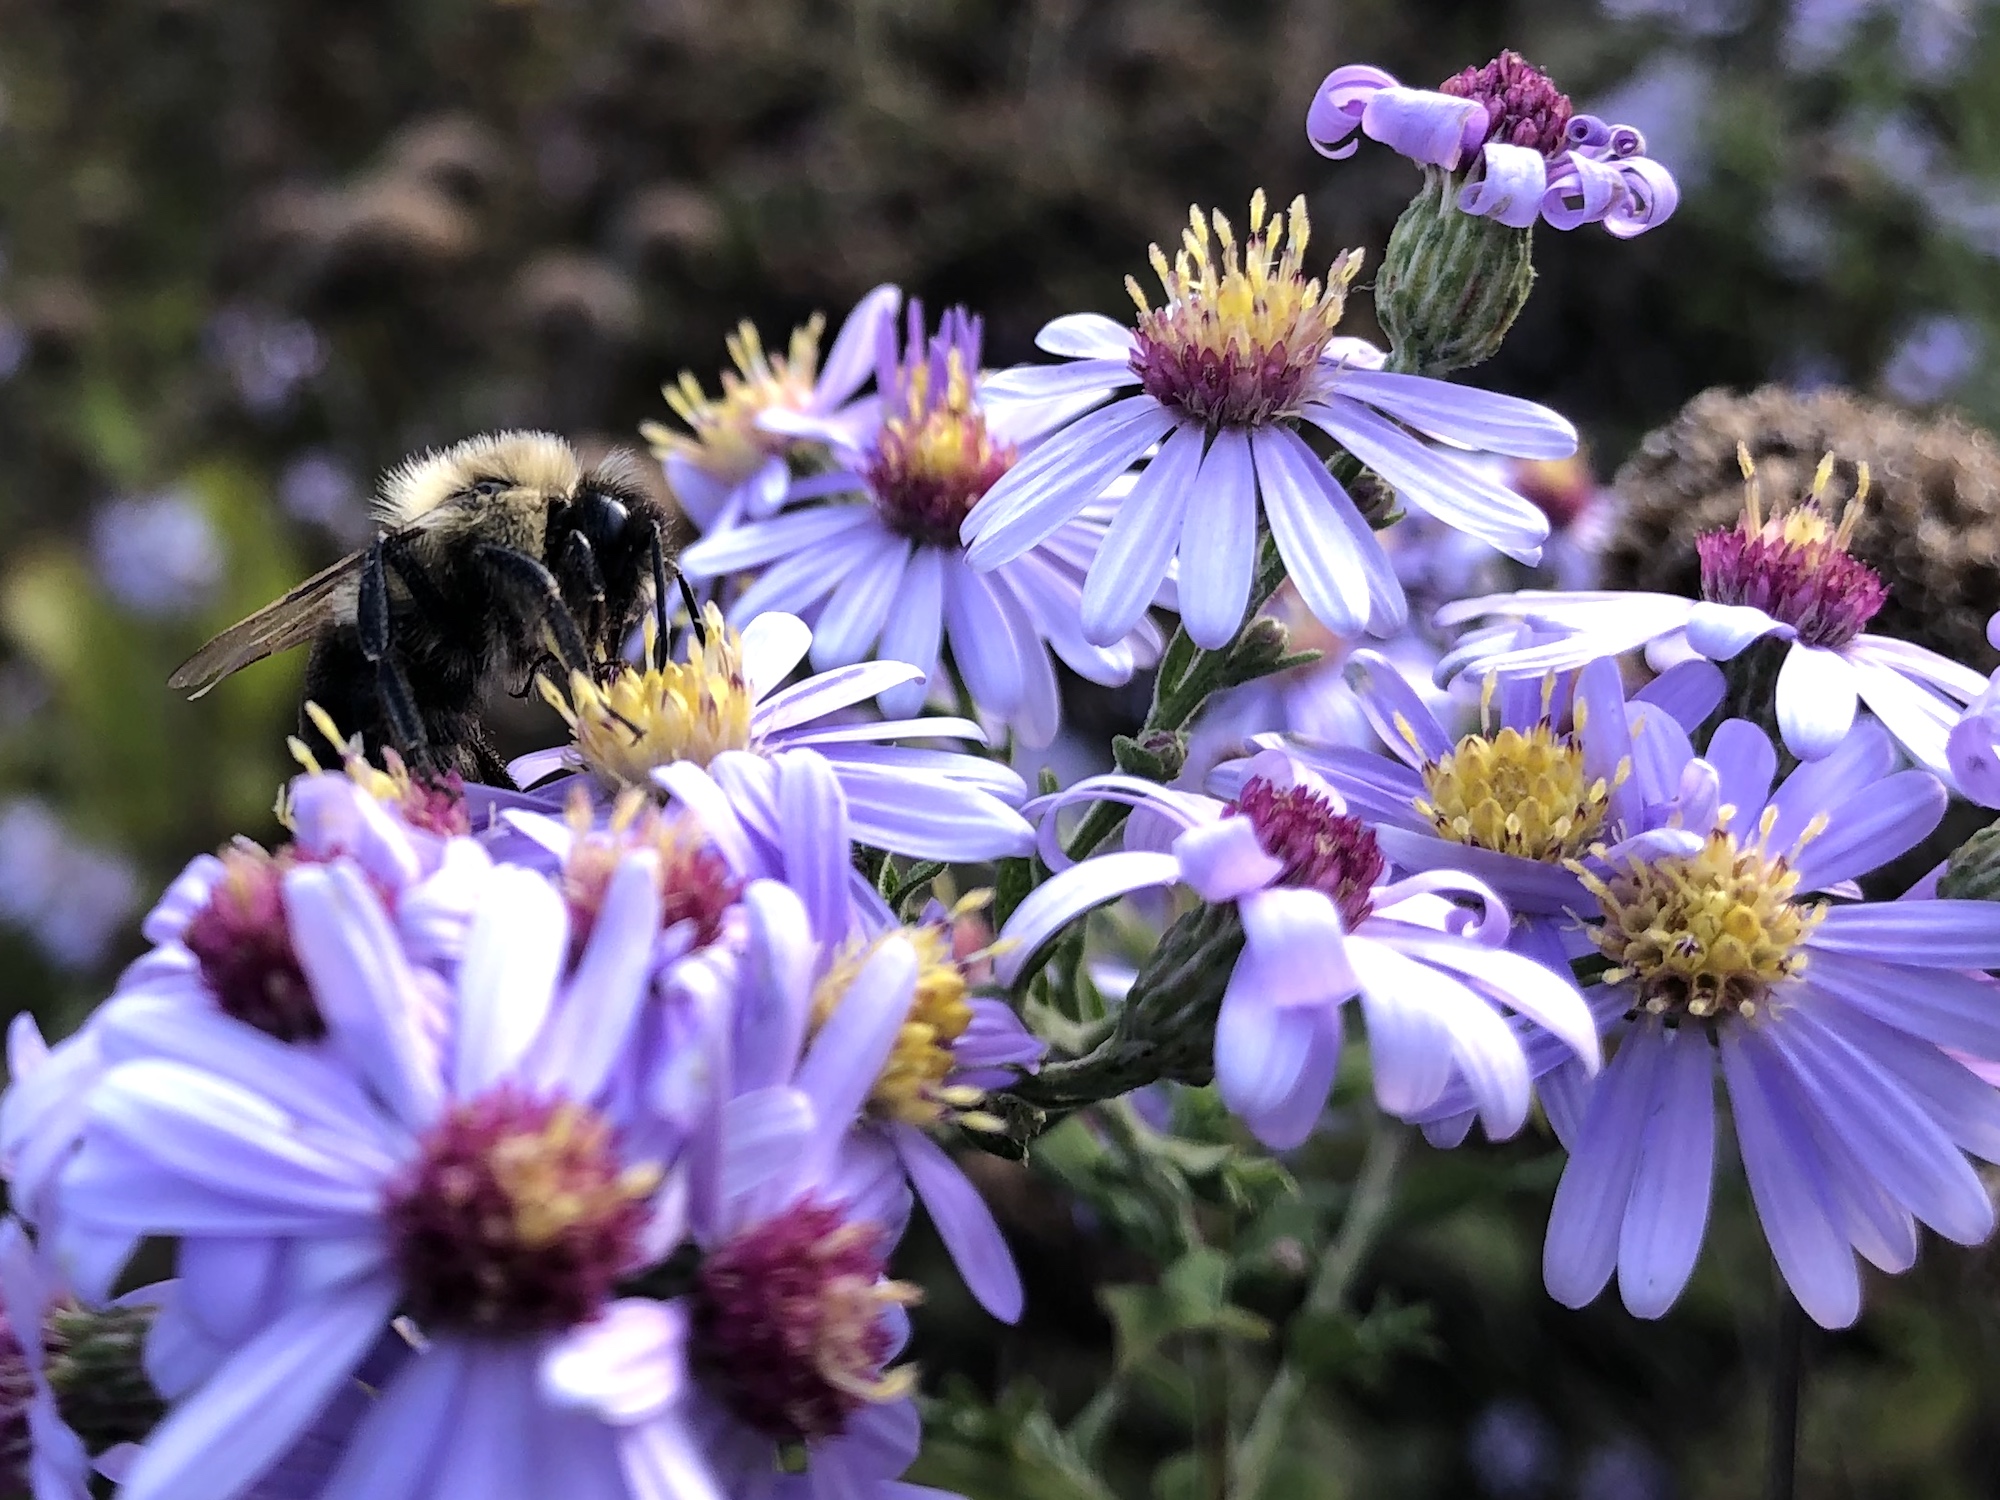 Bumblebee on aster on bank of retaining pond on October 6, 2020.